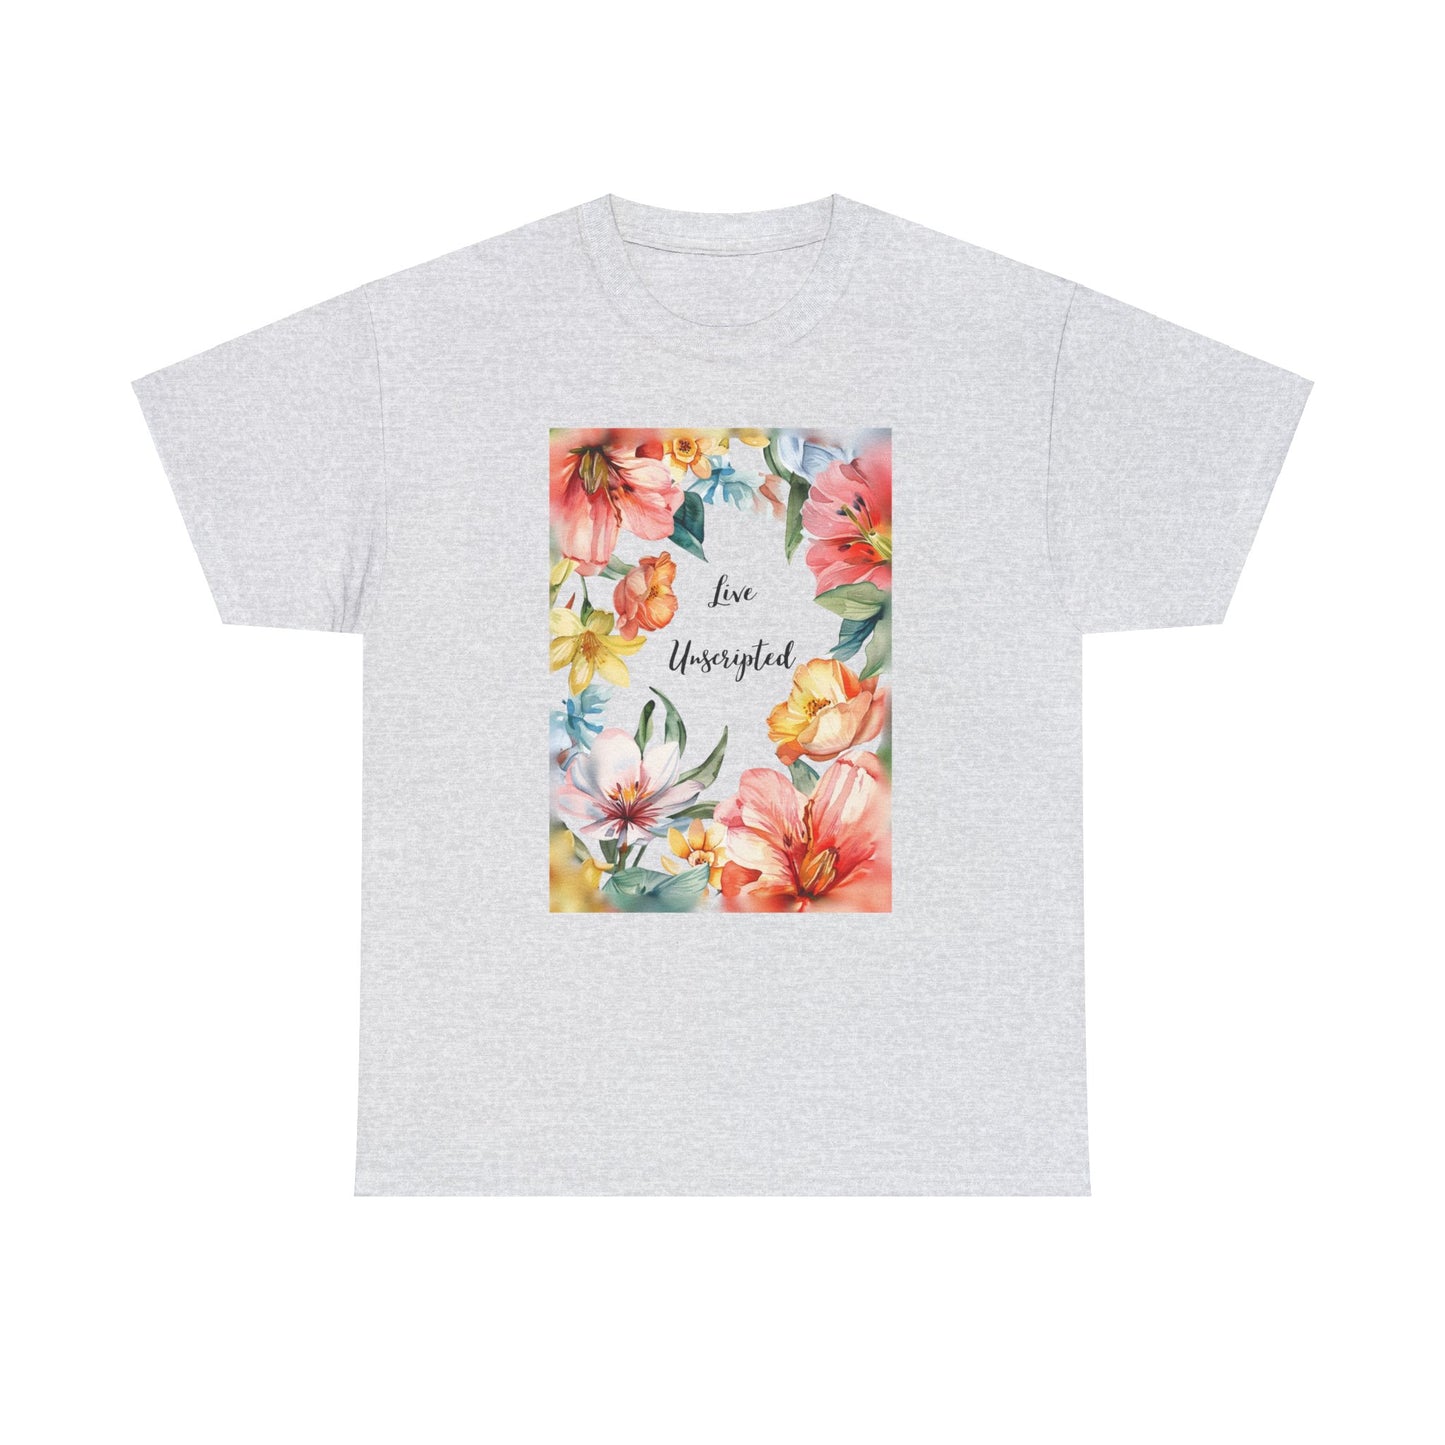 Flowery Art Inspirational Cottagecore T-Shirt,  Fairycode floral painting, Live unscripted tag line, life quotes